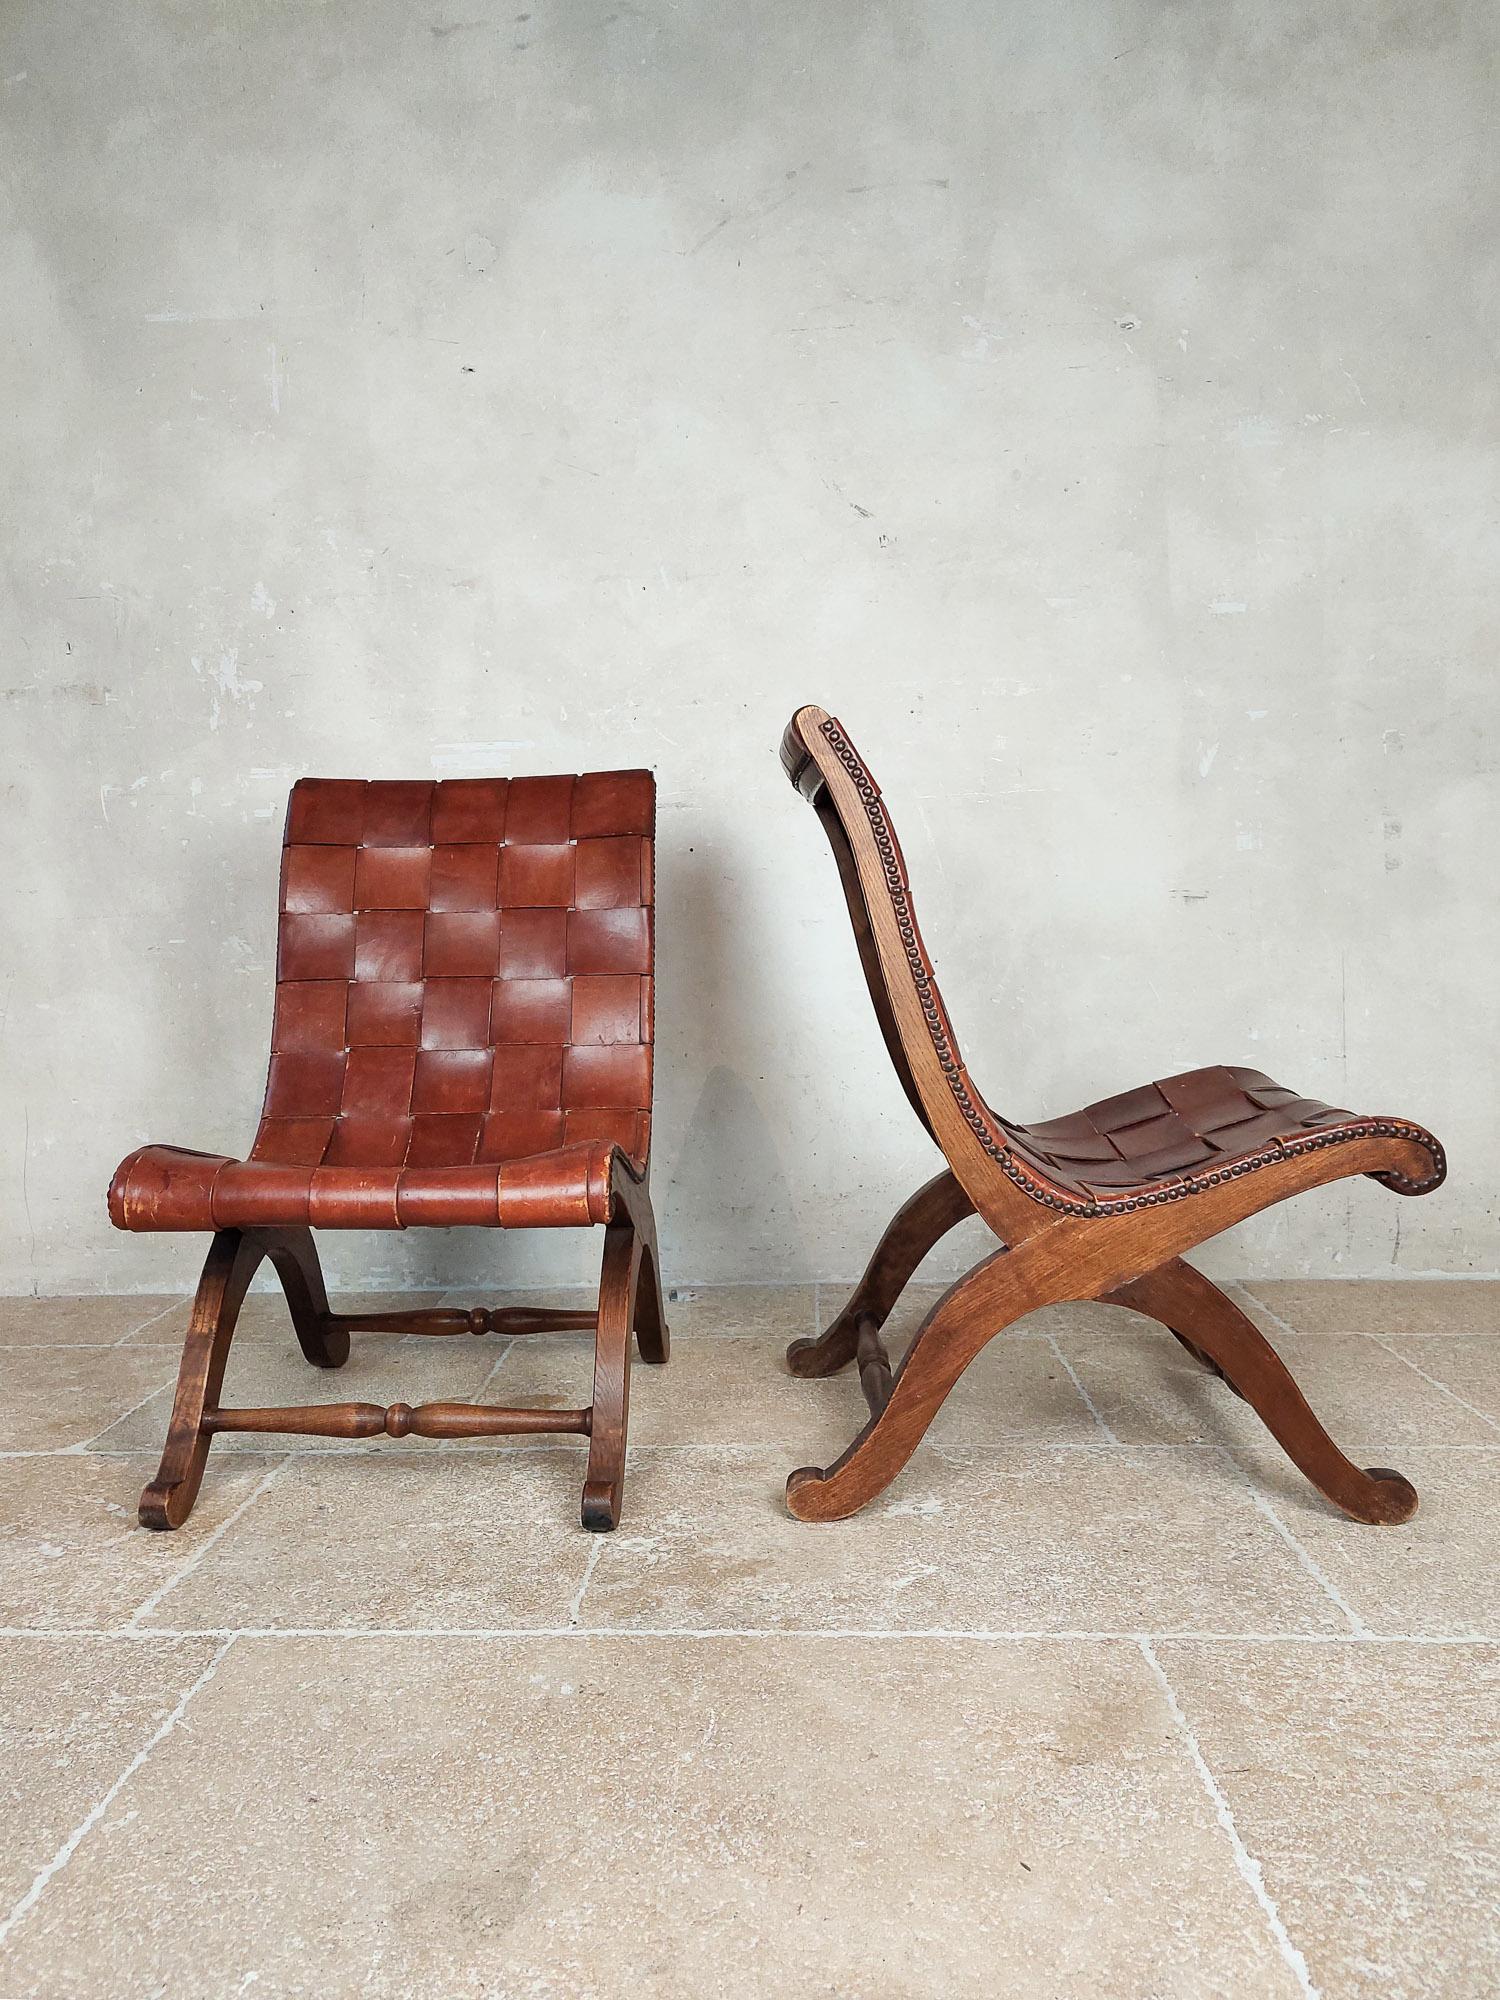 Pair of Spanish leather 'Slipper chairs' by Pierre Lottier for Valenti, 1940-1950s. Low vintage armchairs / fireplace chairs made of brown oak wood with and original cognac woven leather seat with brass nail head details.

Measures: H 77 x W 46 x